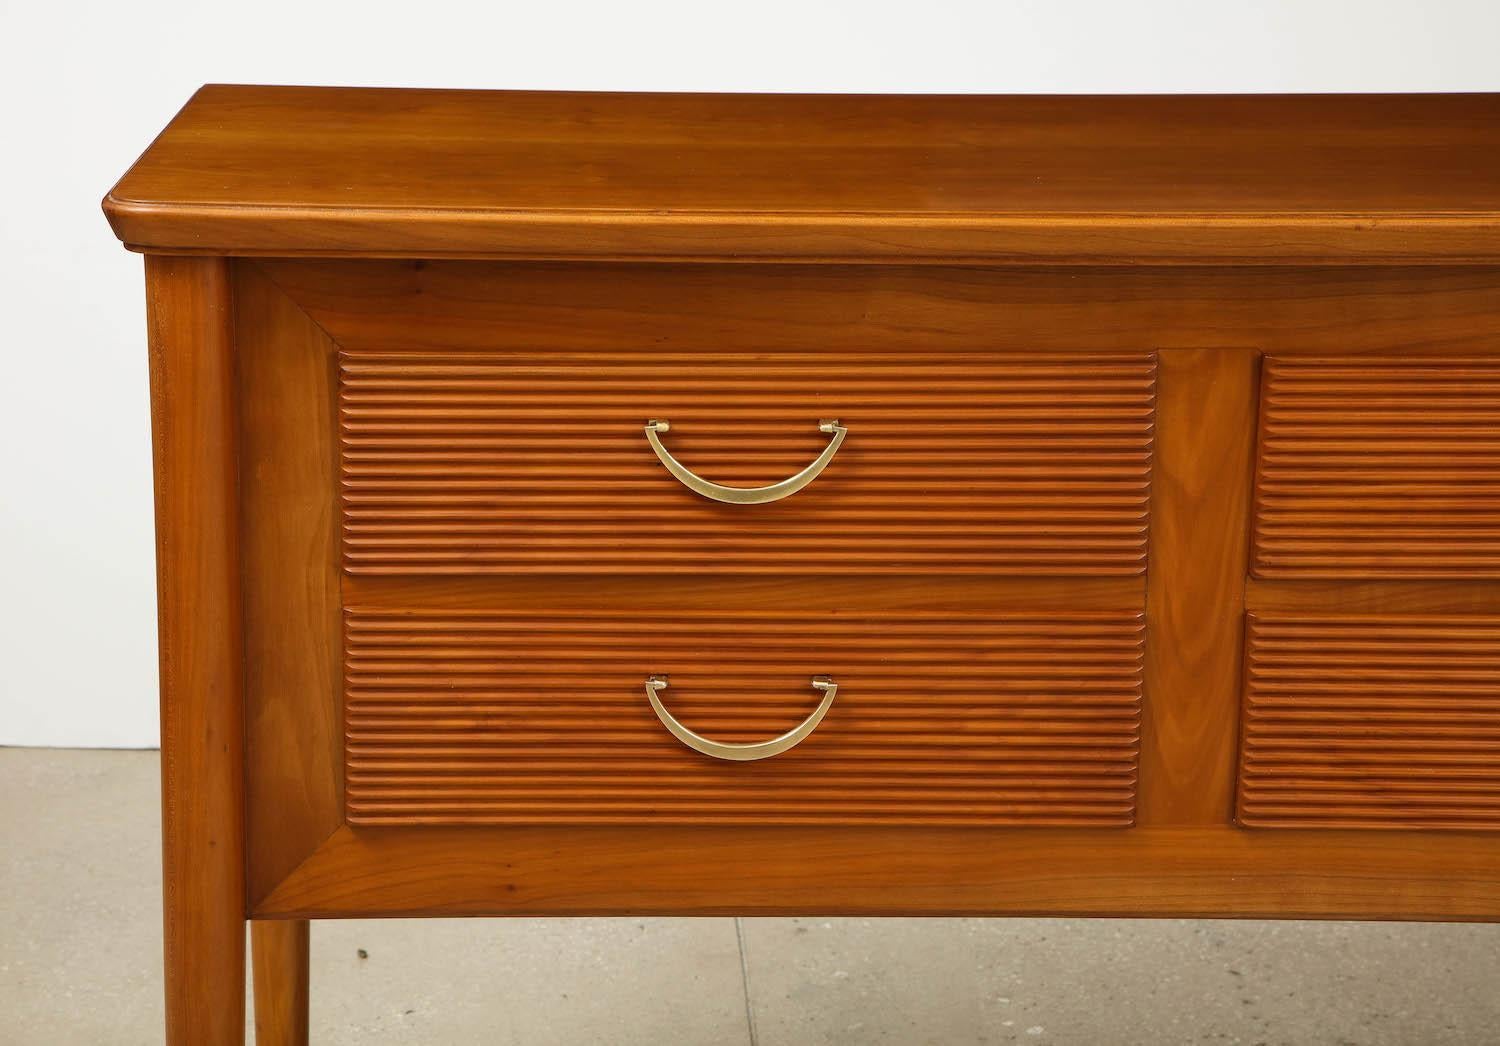 Walnut sideboard with ribbed drawer faces and brass pulls. A fantastic and restrained Buffa design. Wood has recently been refinished and brass has been polished.